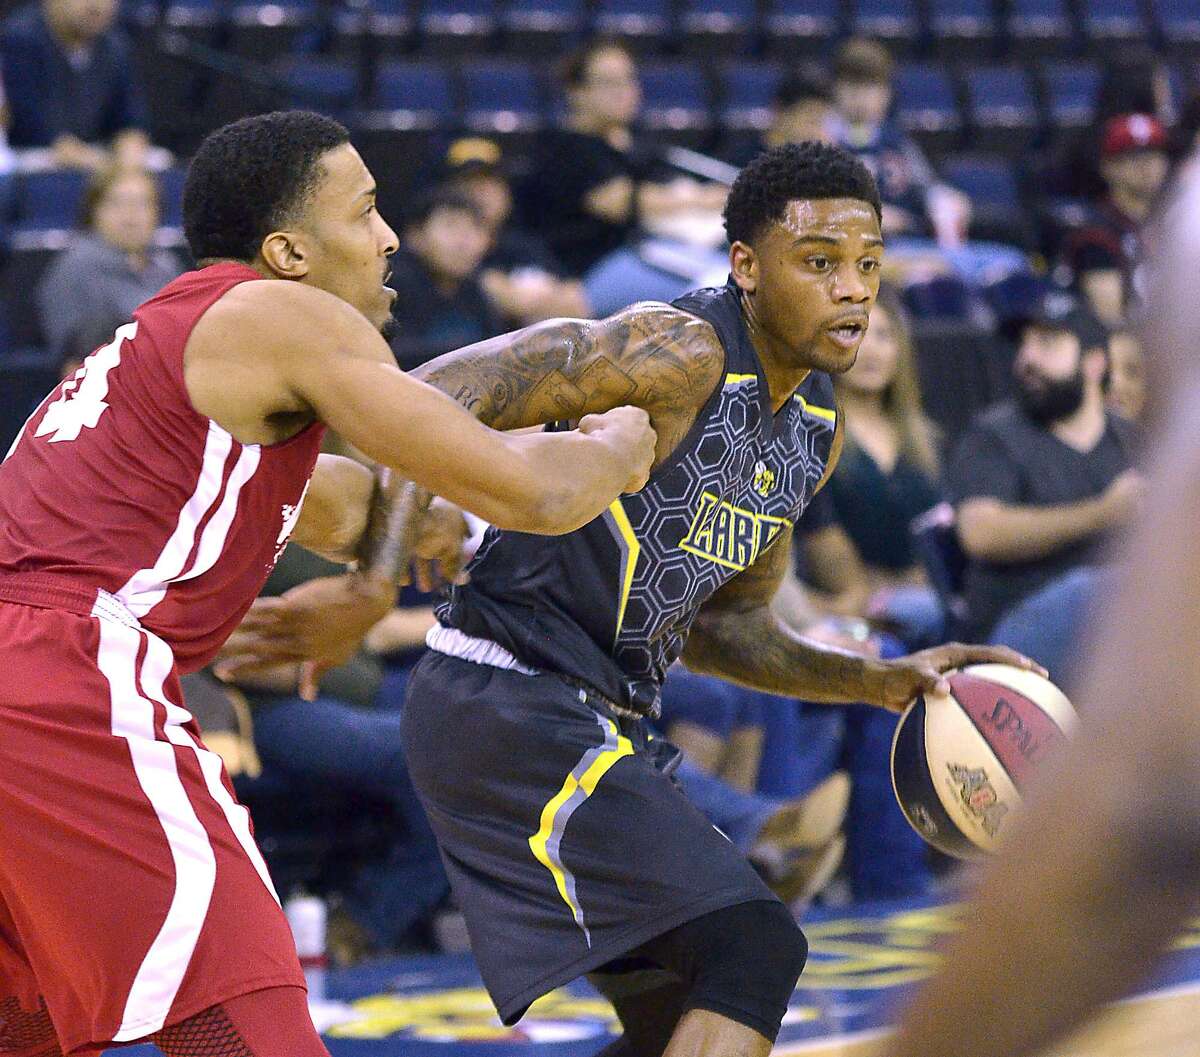 Former TAMIU guard Kevin Jefferson Jr. has played the past two years for the Swarm and led the team averaging 18.8 points last season.